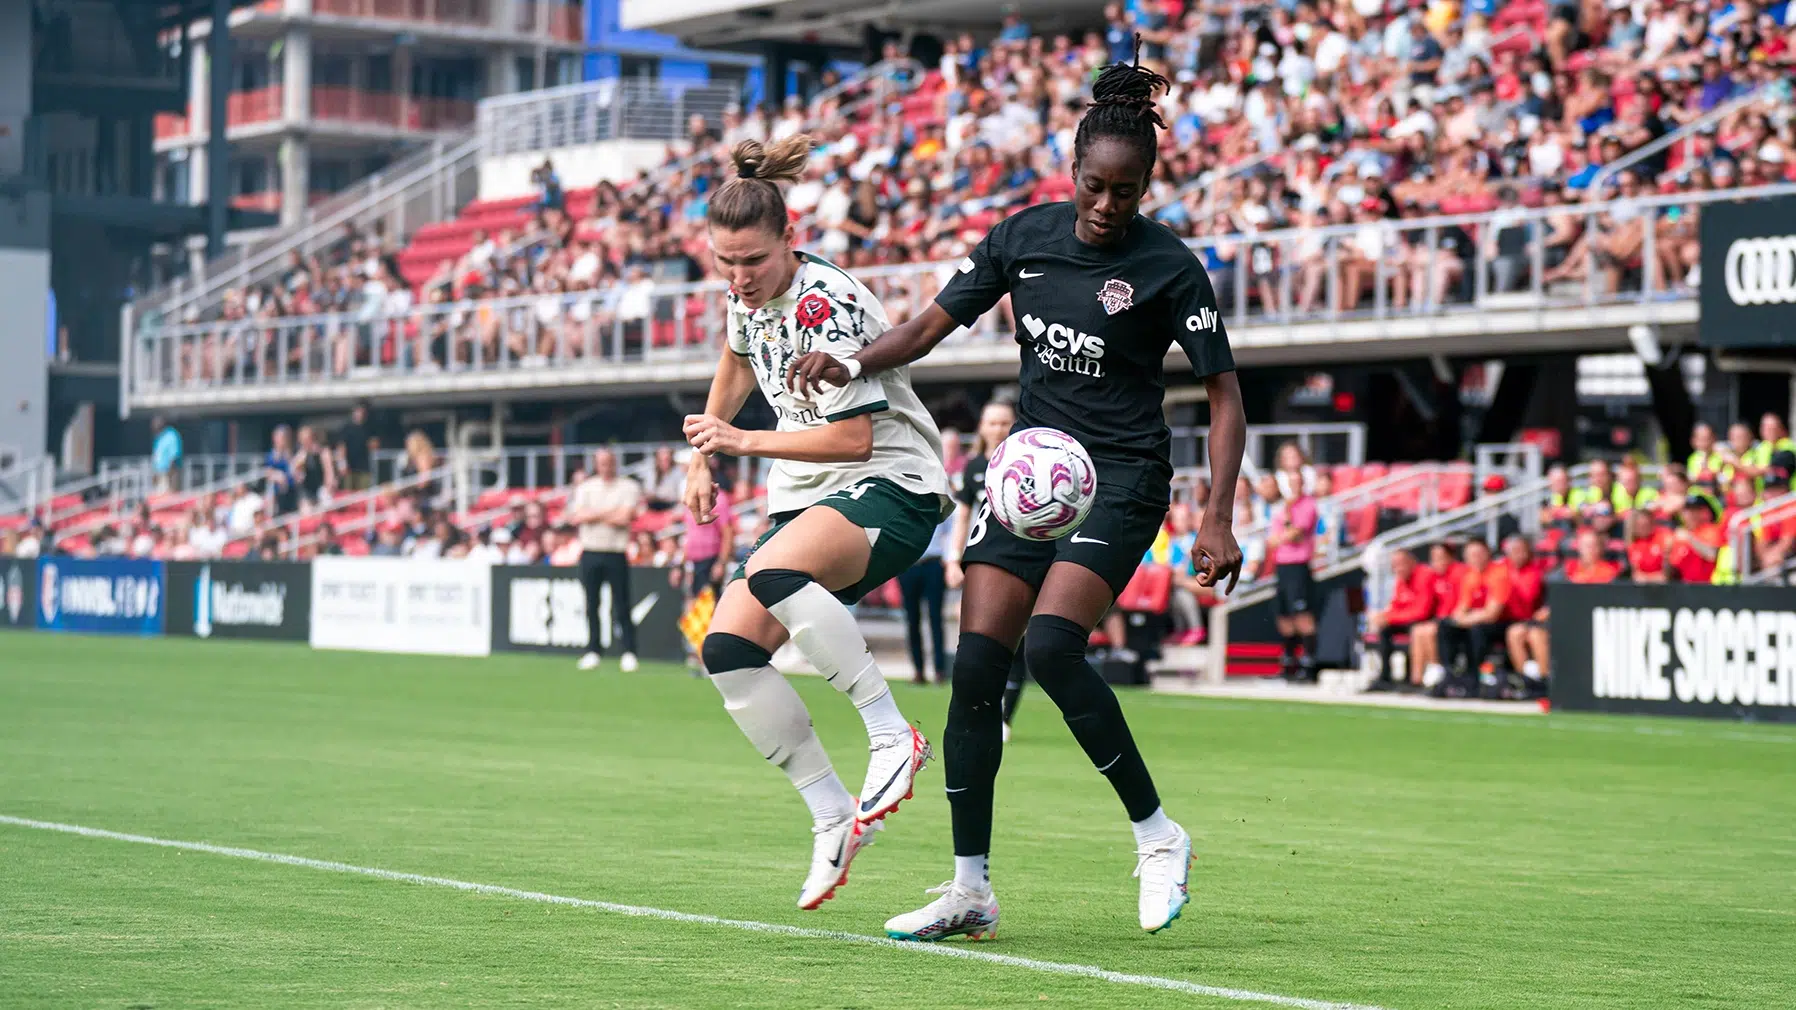 Ouleymata Sarr in an all black uniform looks to control the soccer ball as a player in a white top and green shorts tries to defend.